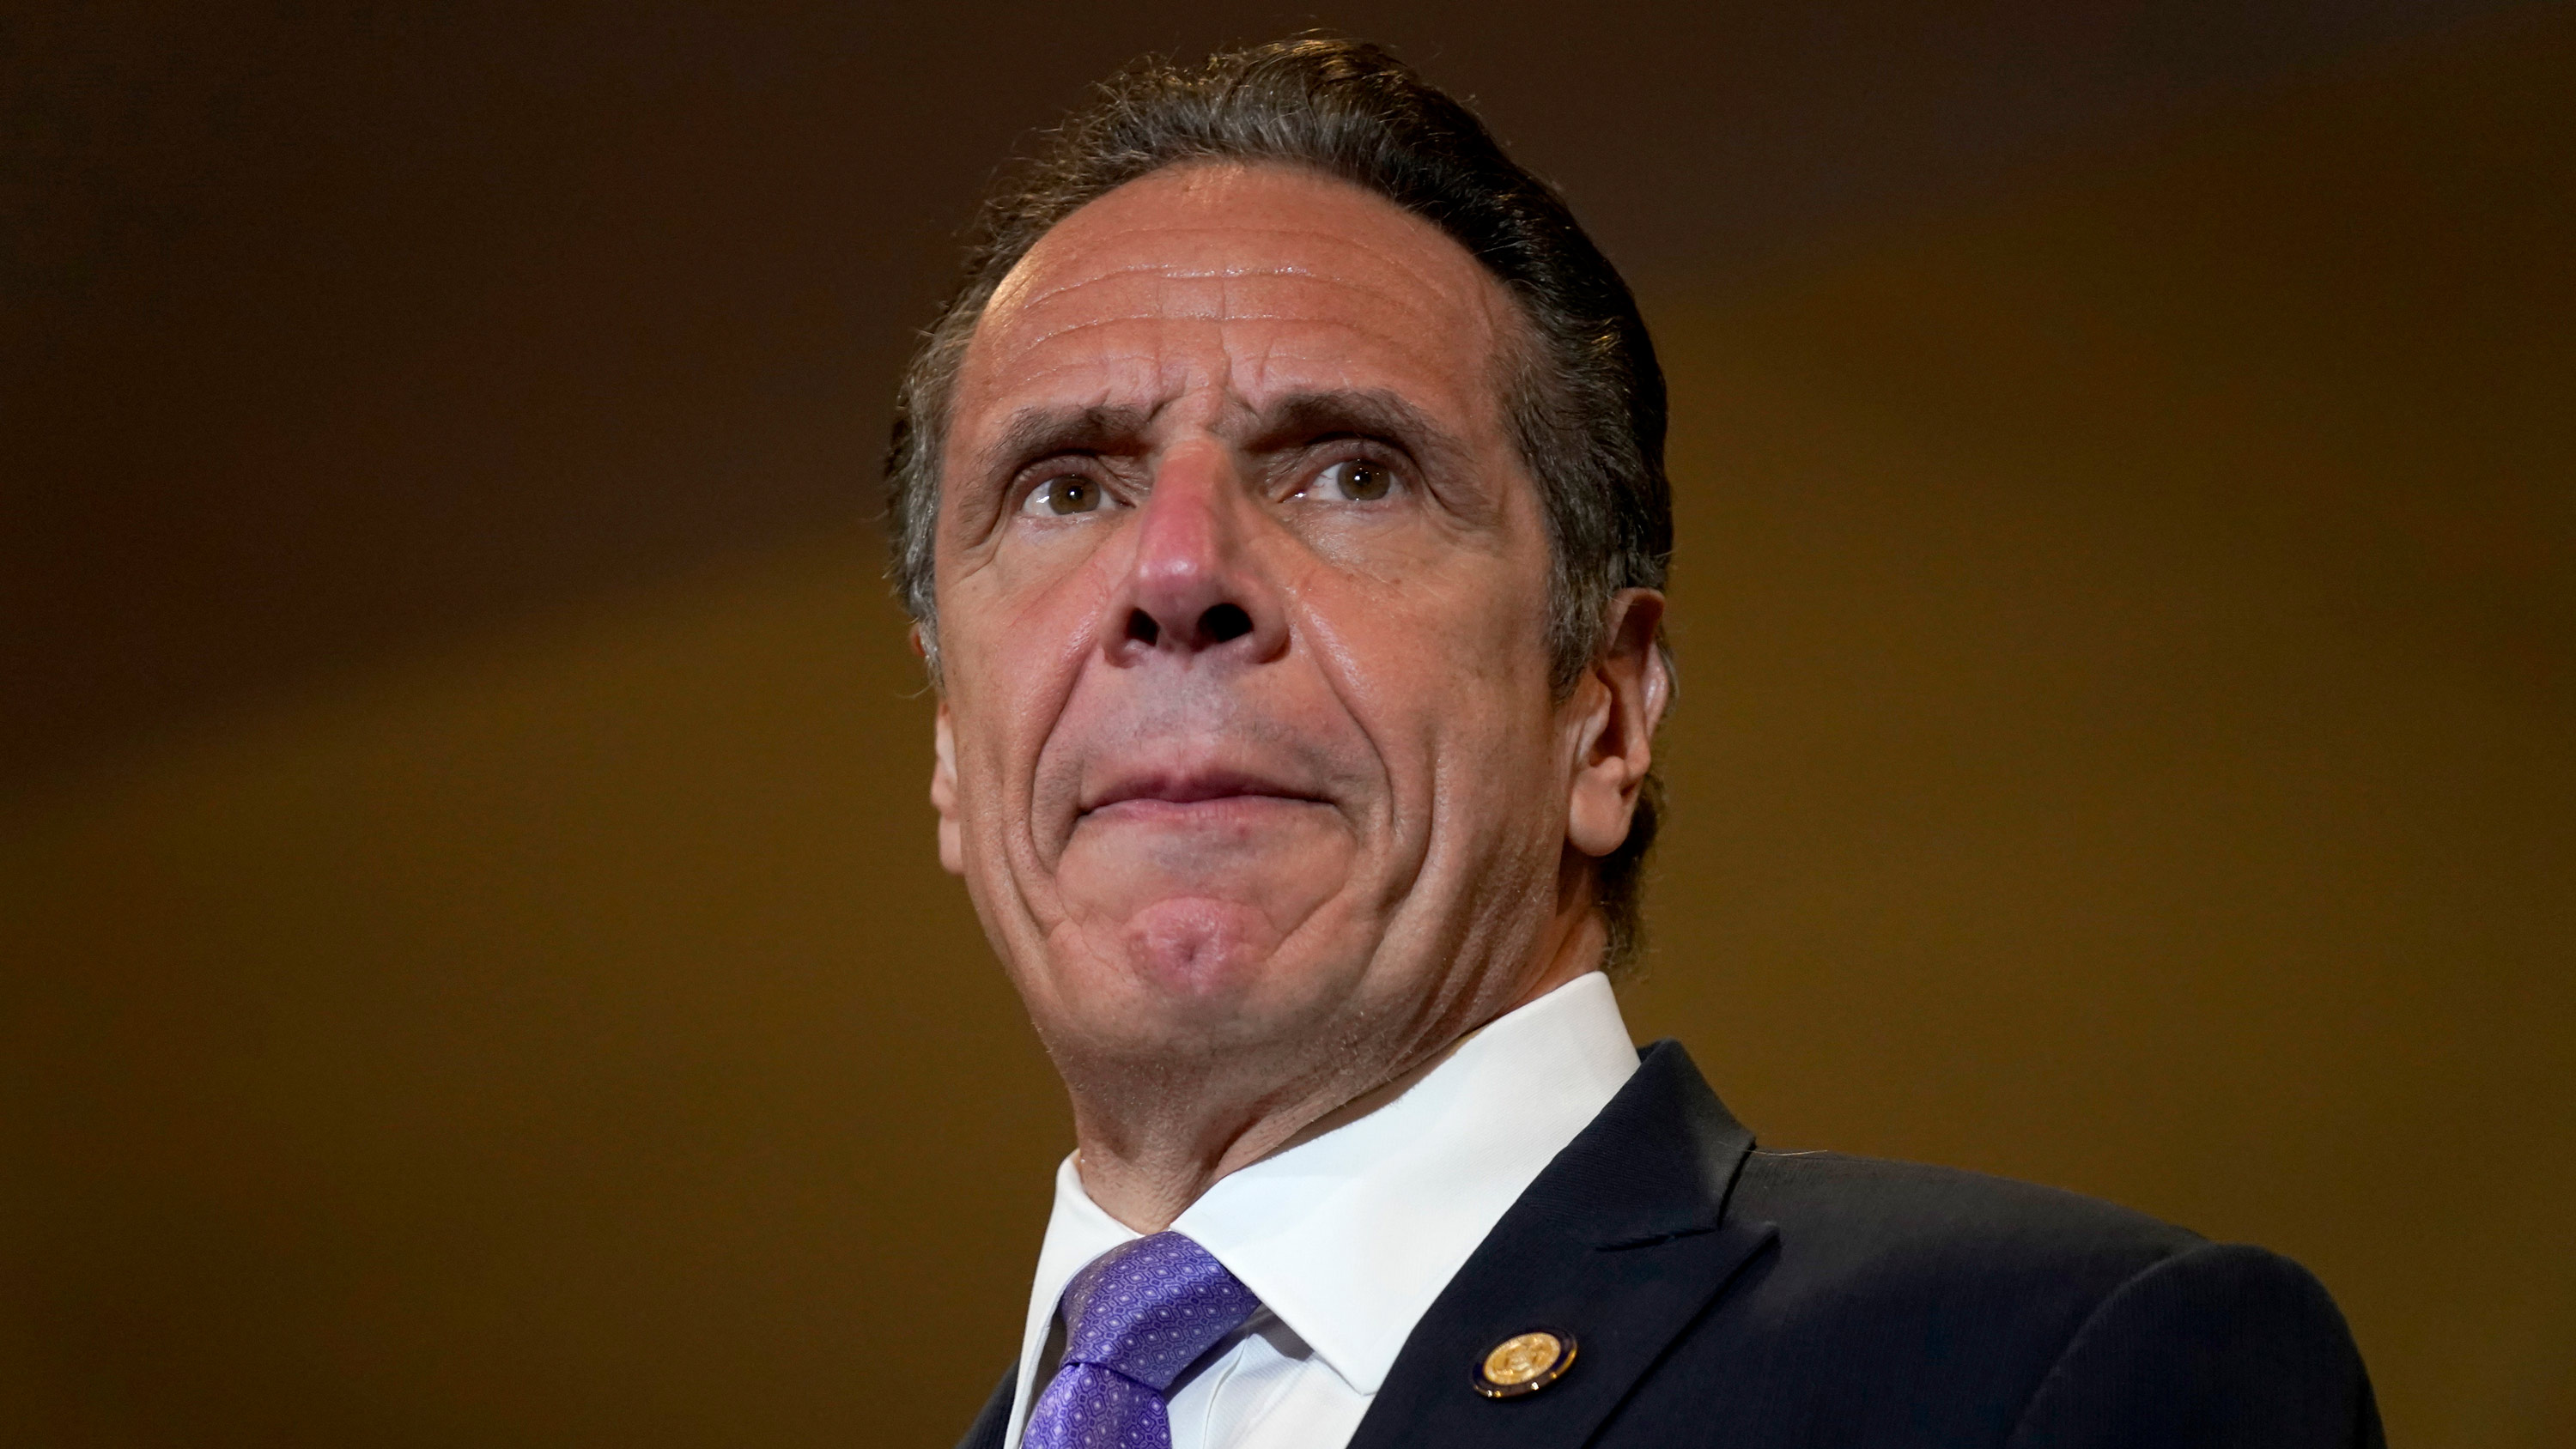 New York Governor Andrew Cuomo speaks at Grace Baptist Church in Mt. Vernon, New York, on March 22.